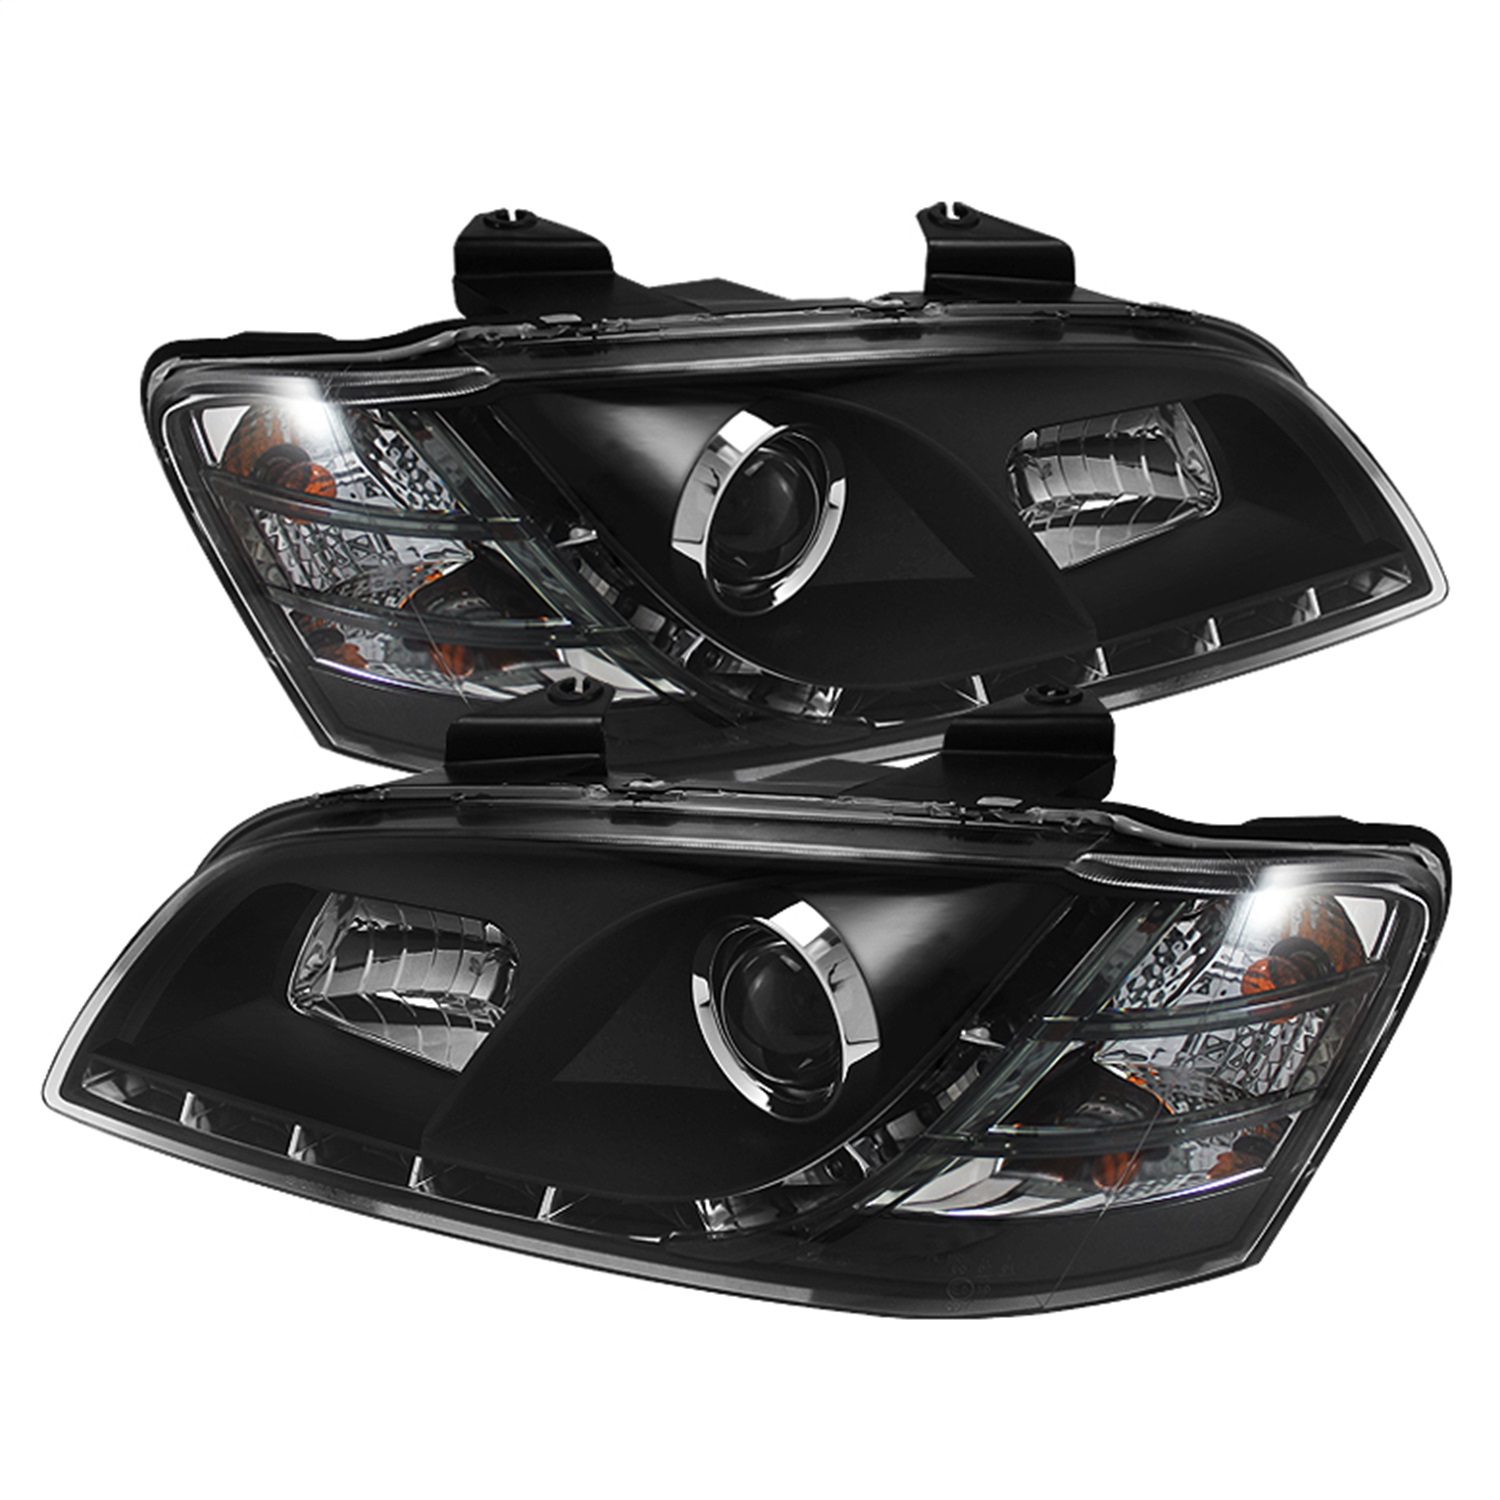 Spyder Auto 5011626 DRL LED Projector Headlights Fits 08-09 G8